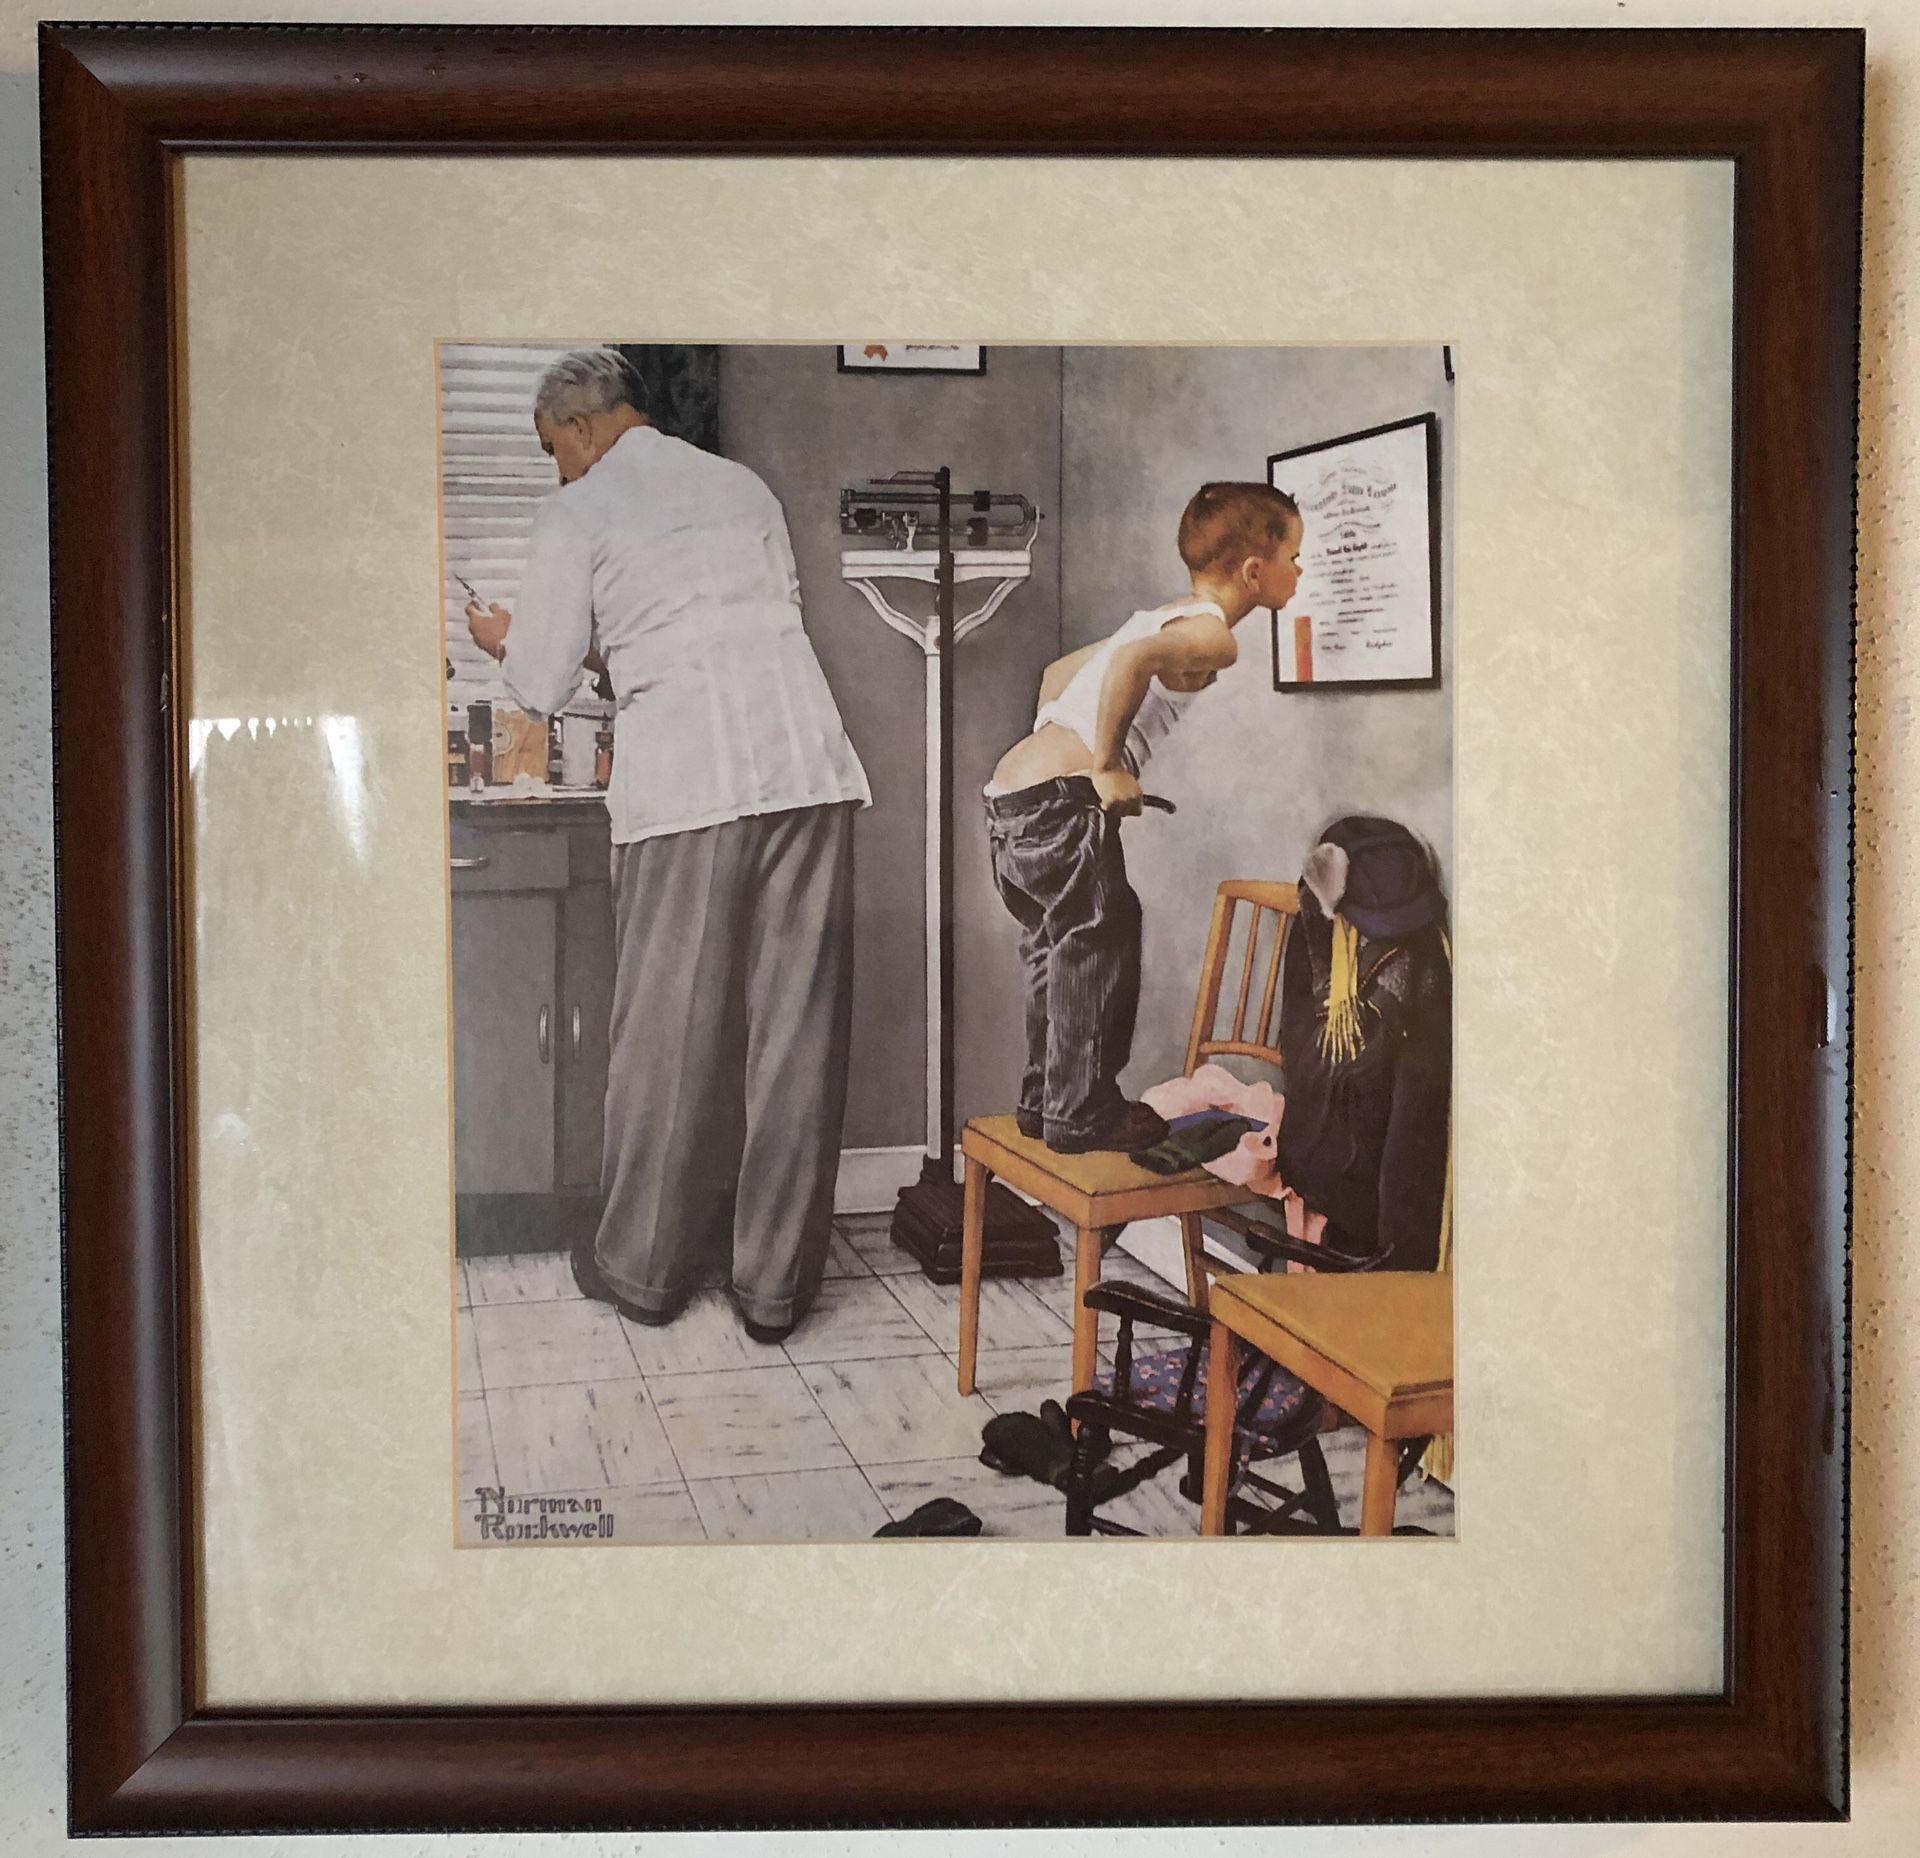 Normal Rockwell "Before the Shot" Print